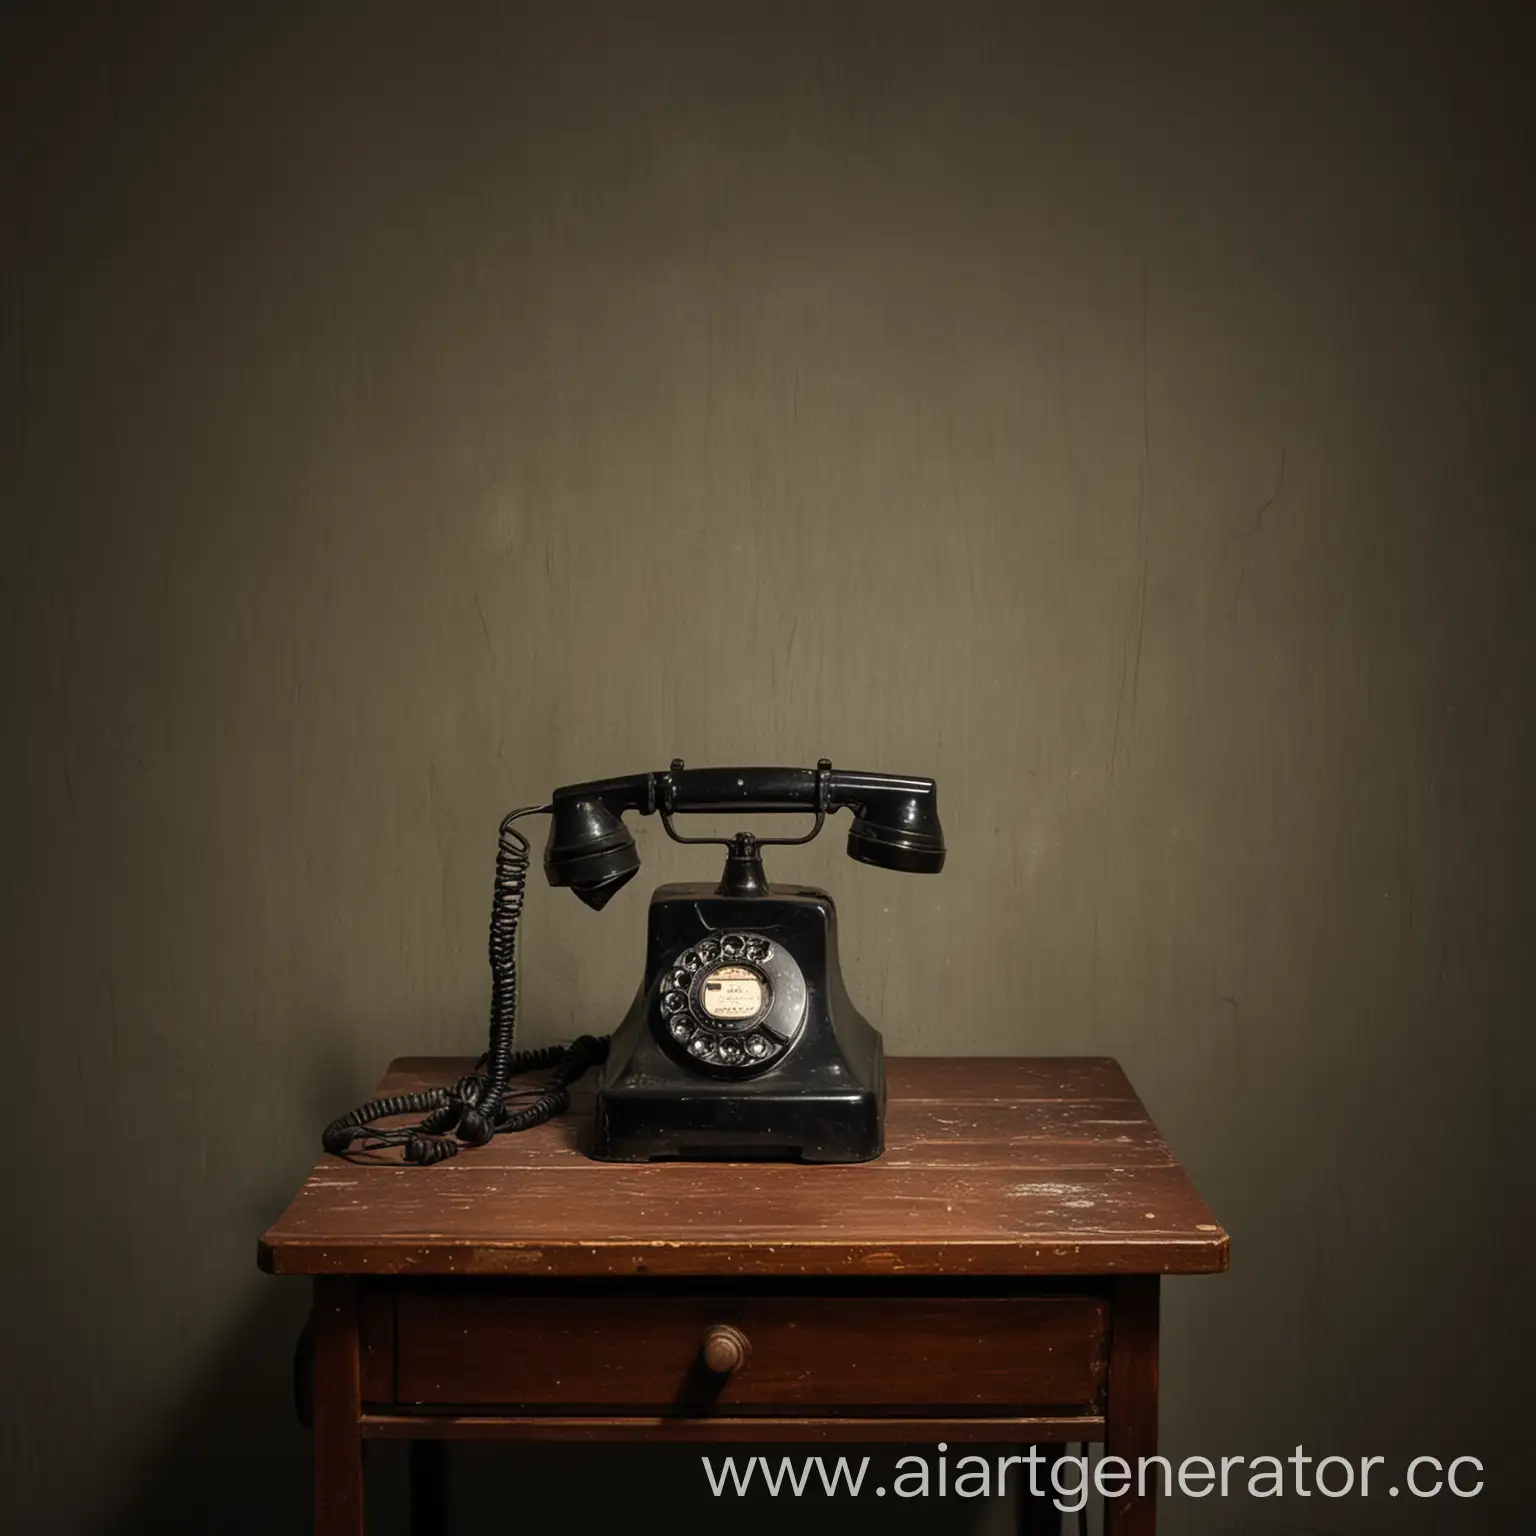 old telephone on a table in the center of a dark room